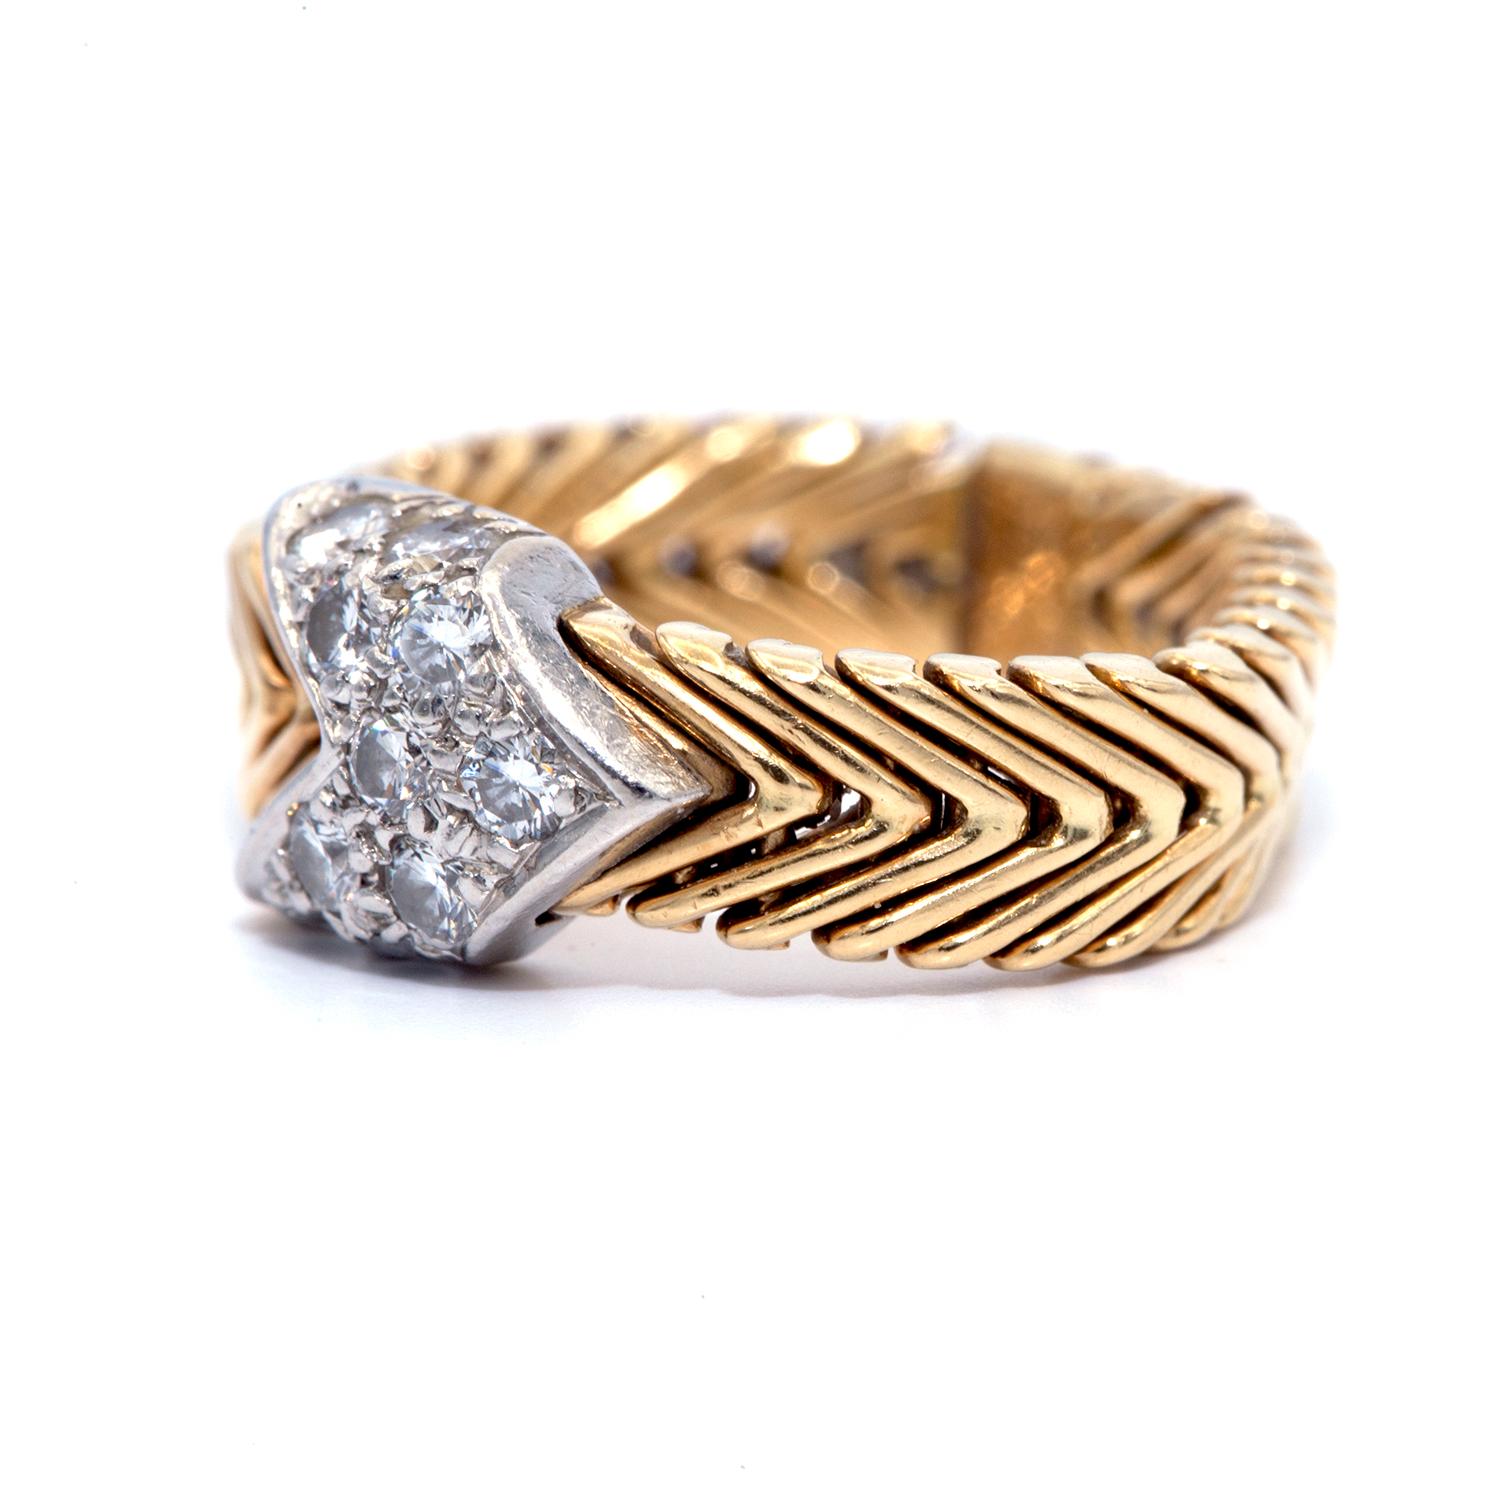 This gold braided band was designed by Paloma Picasso for Tiffany & Co. in the 1980s.
Paloma Picasso for Tiffany 18-Karat Chevron Woven Gold Ring with Diamond Arrow
A design Classic by Paloma Picasso for Tiffany and Co. of a flexible 18-karat gold